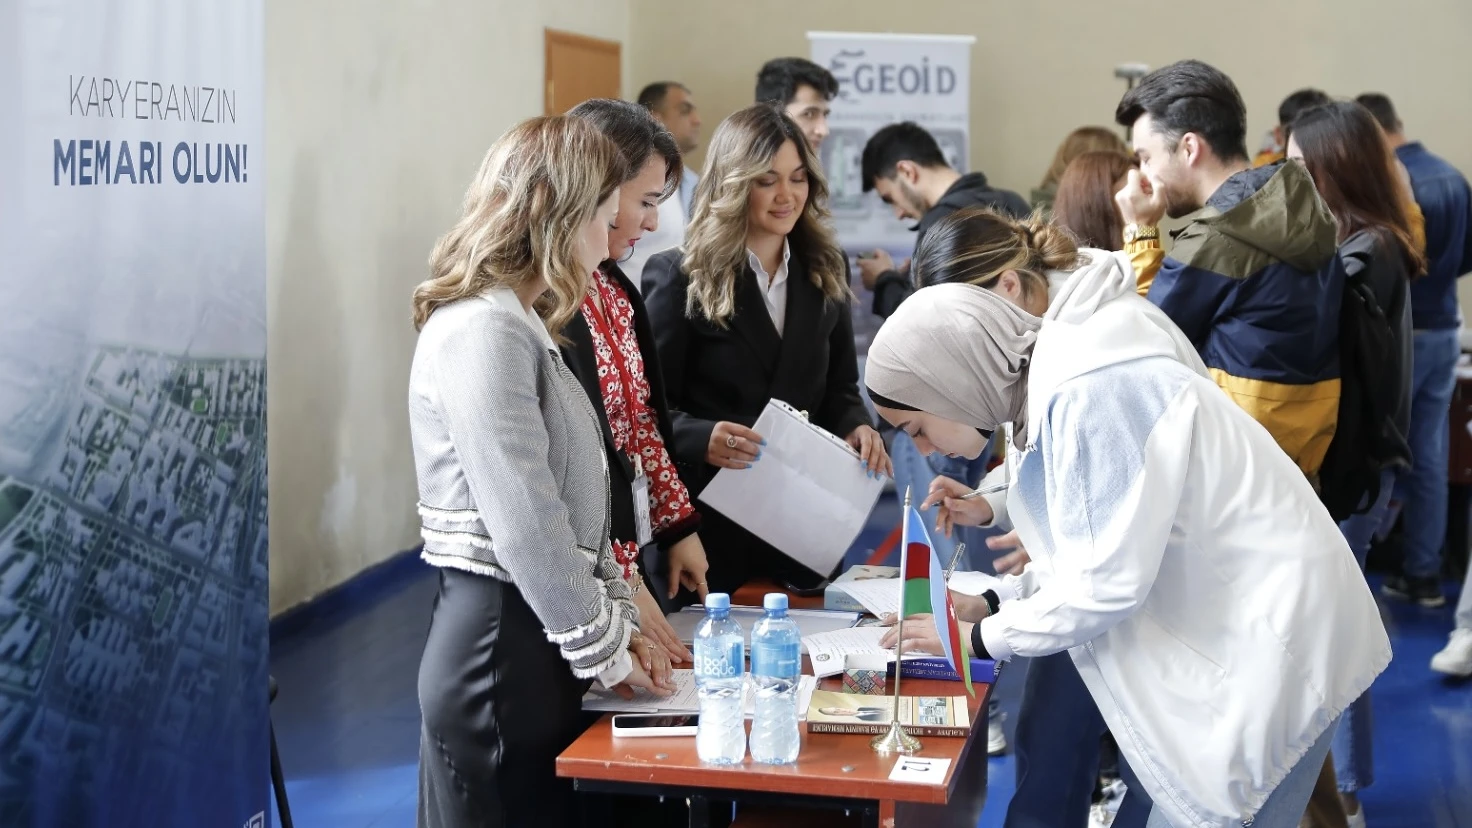 The State Committee on Urban Planning and Architecture took part in the upcoming Career Fair